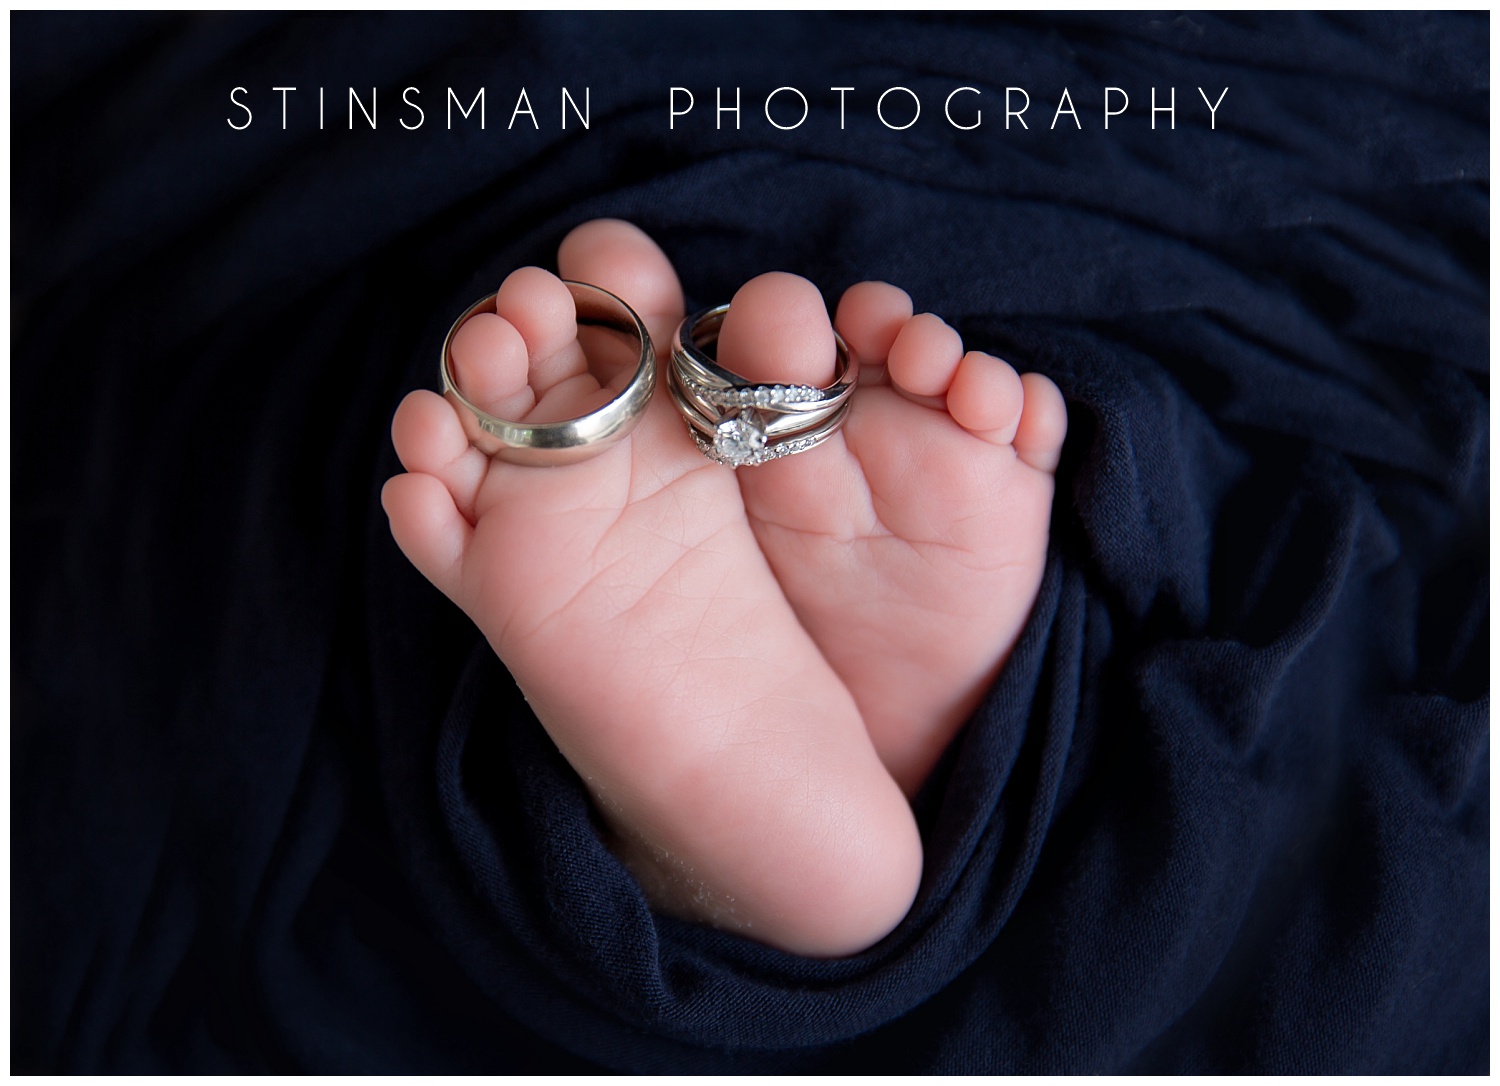 baby toes with wedding rings wrapped around in burlington nj studio